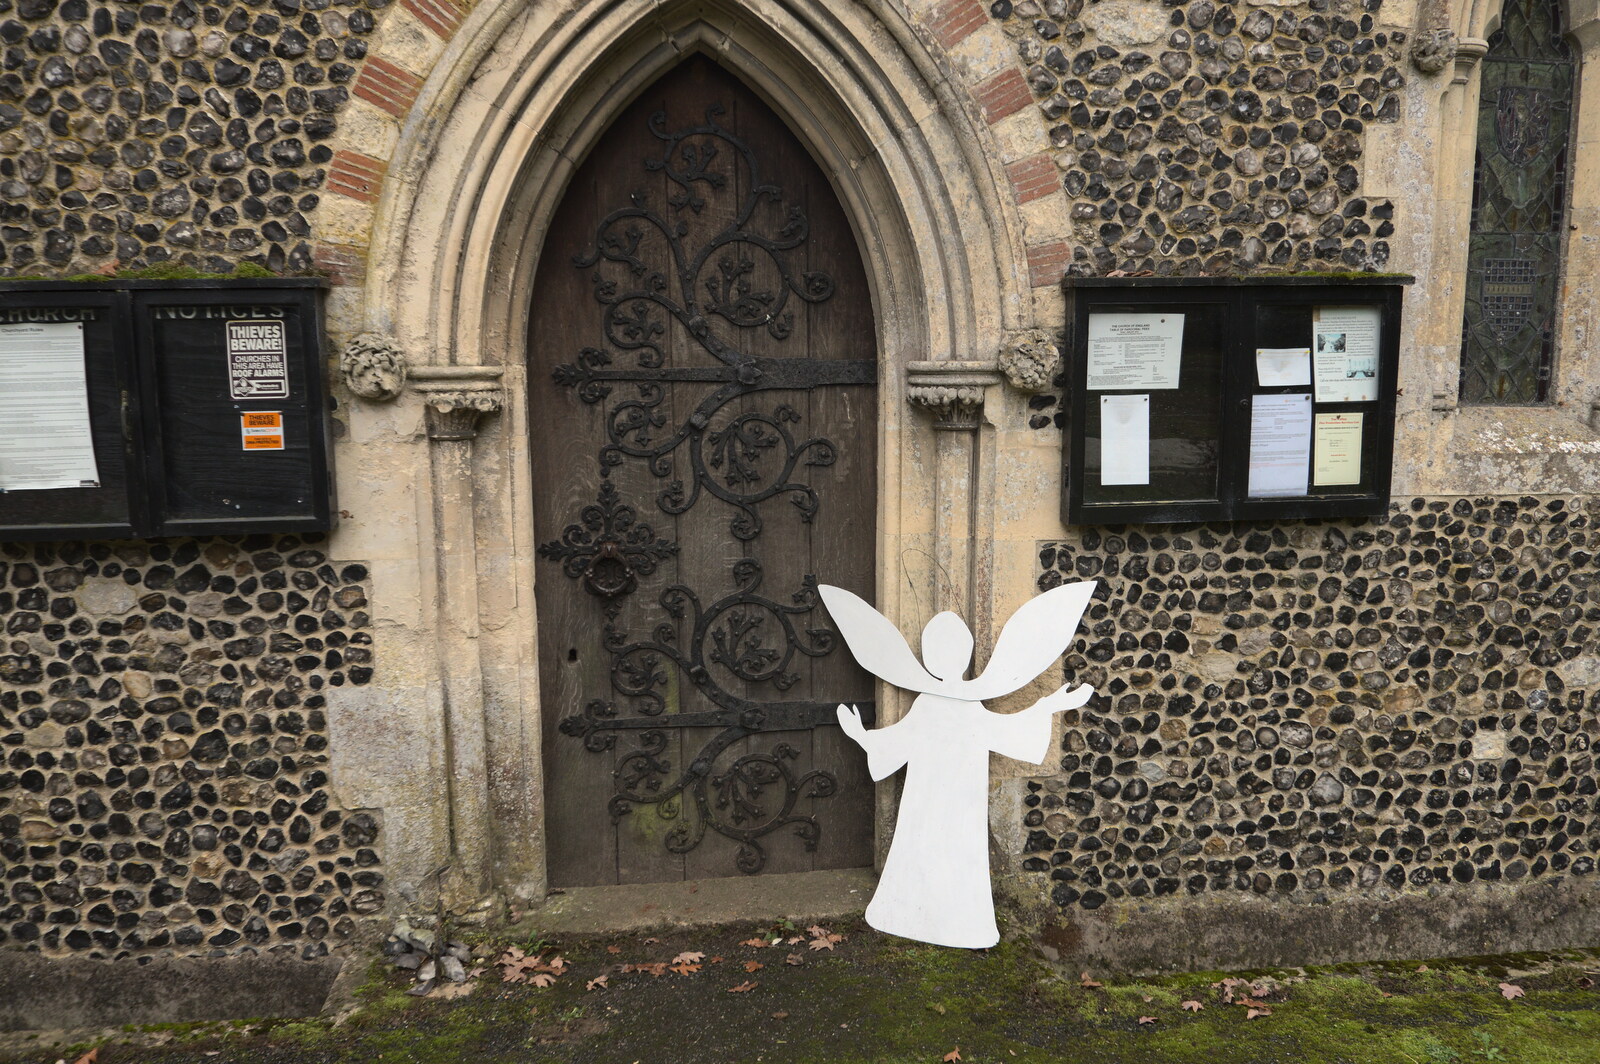 Winter Walks around Brome and Hoxne, Suffolk - 2nd January 2023: There's a cut-out angel outside the church